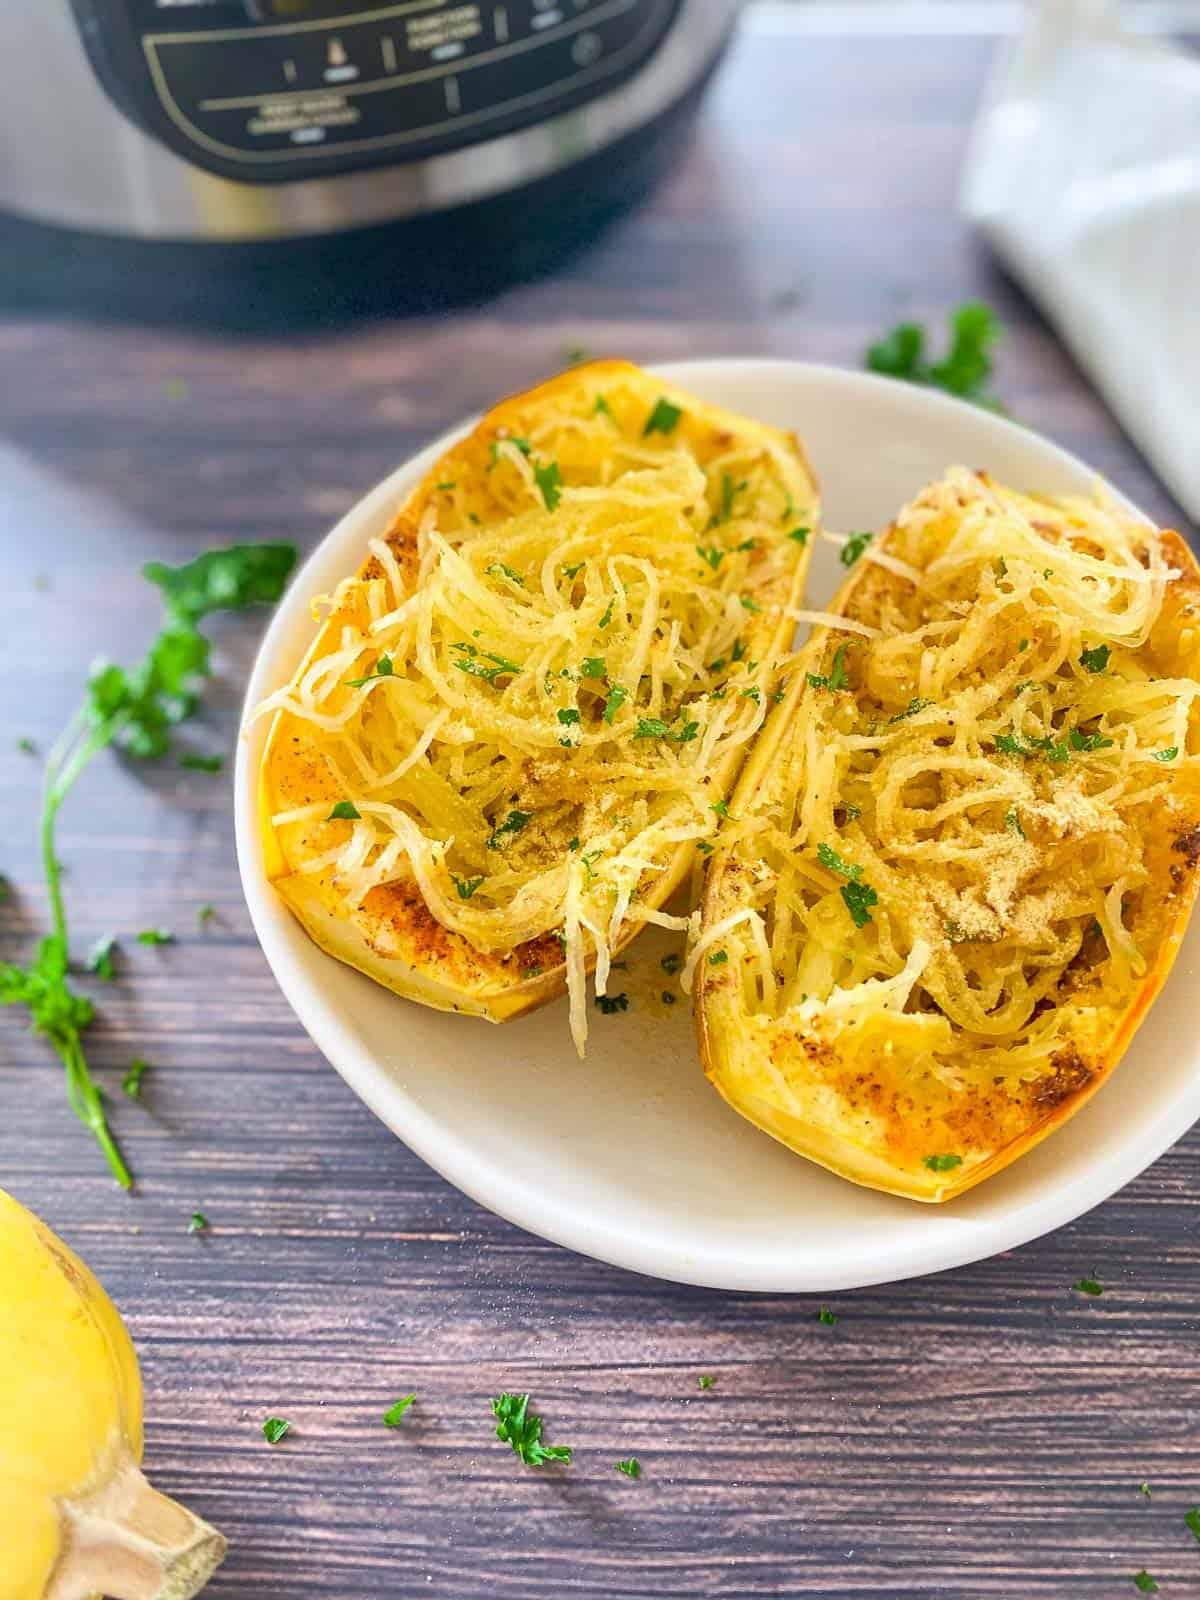 Two halves of a cooked spaghetti squash in a white dish with parsley garnish.